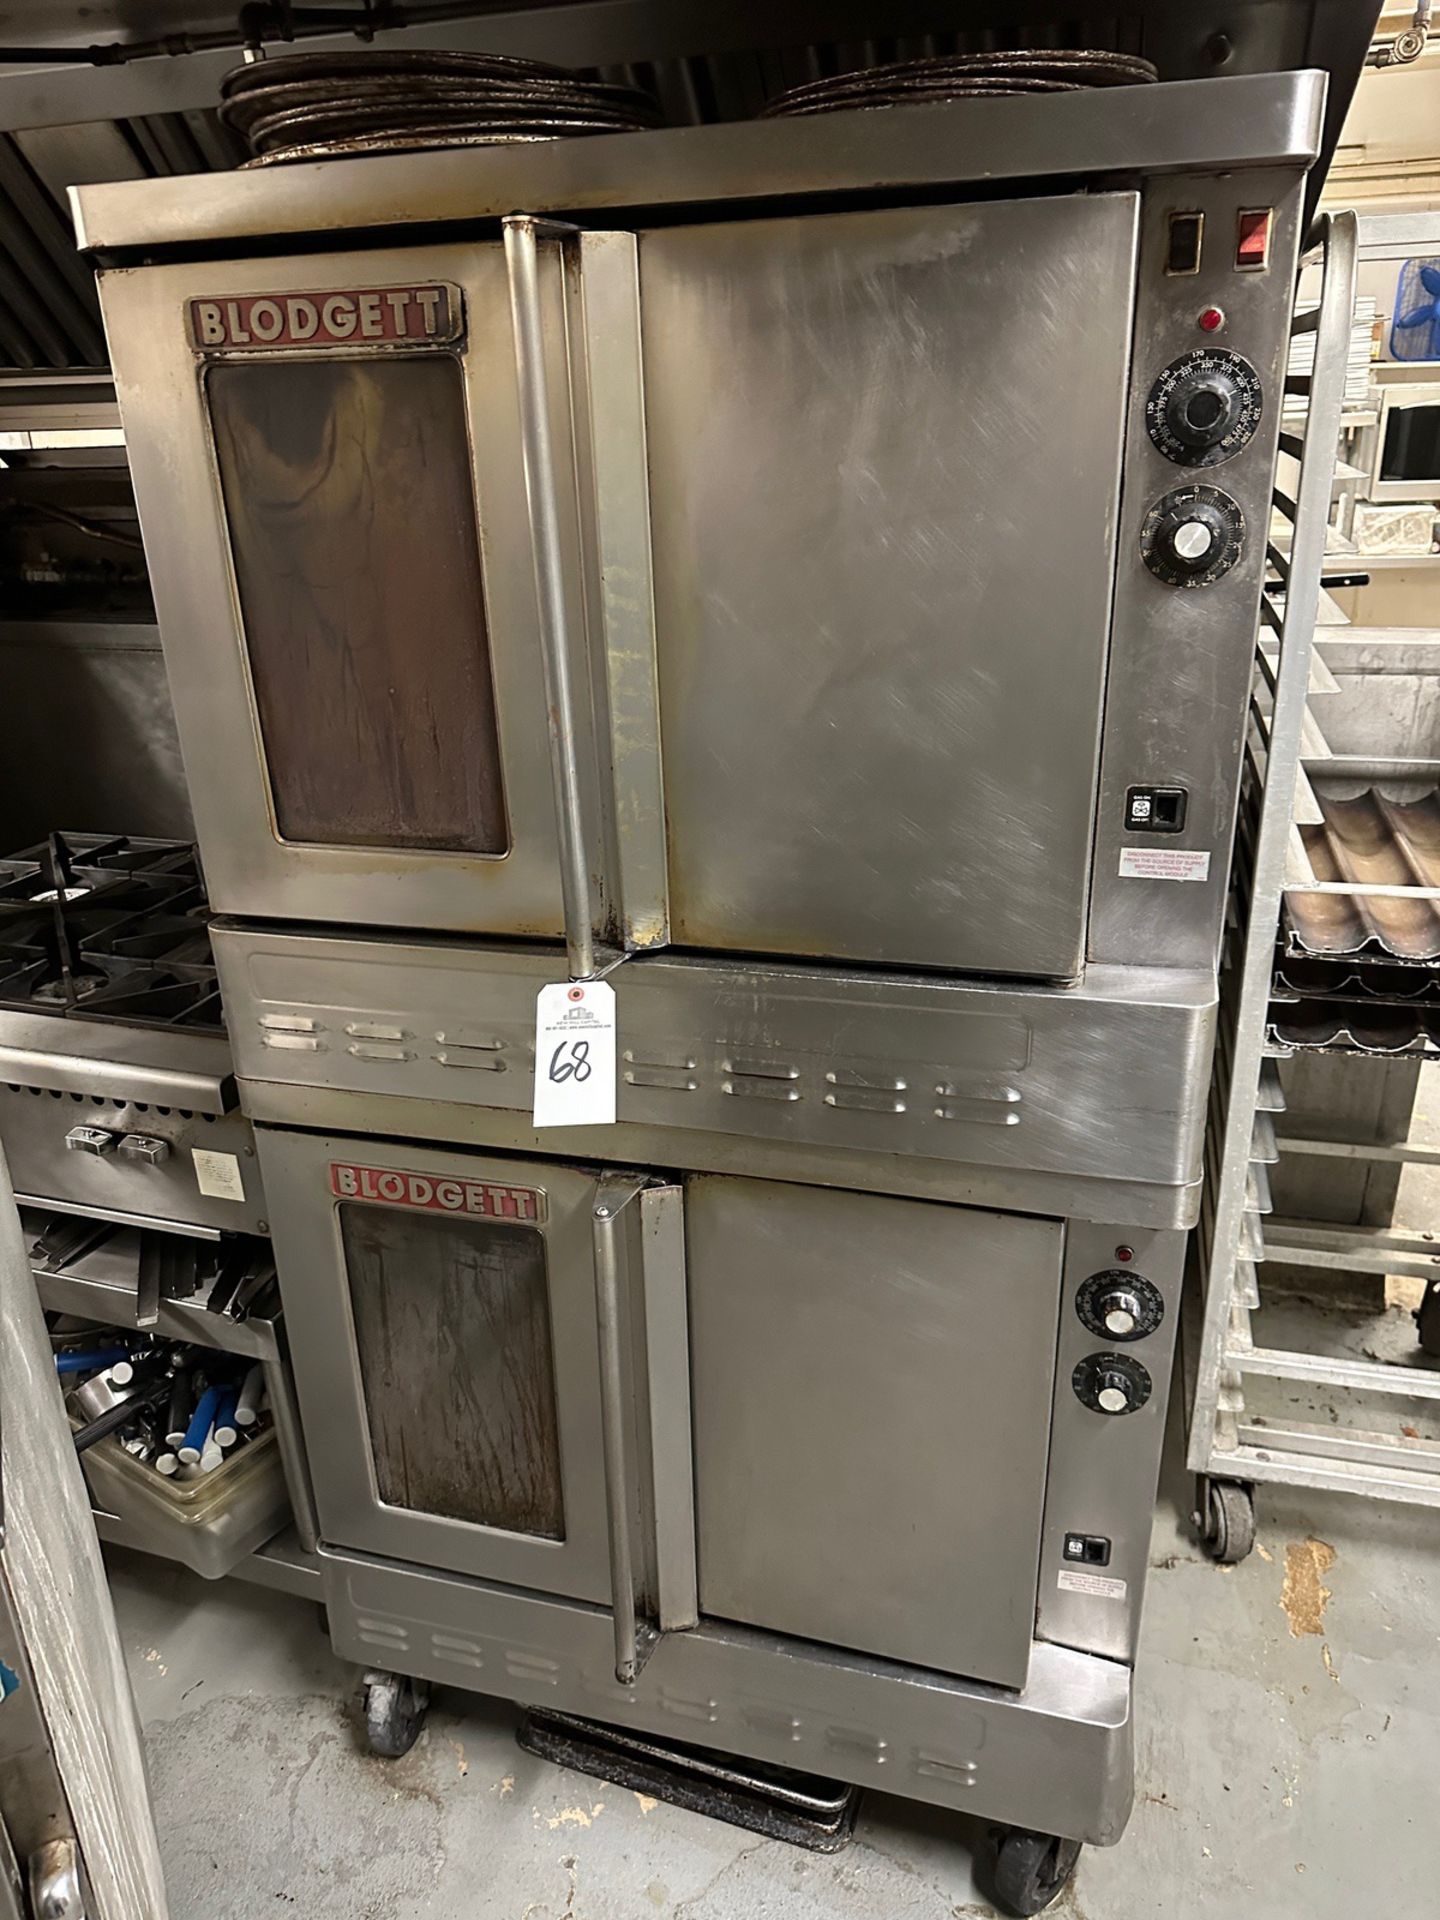 Blodgett Dual Stacked Ovens with Baking Sheets - Subj to Bulk | Rig Fee $200